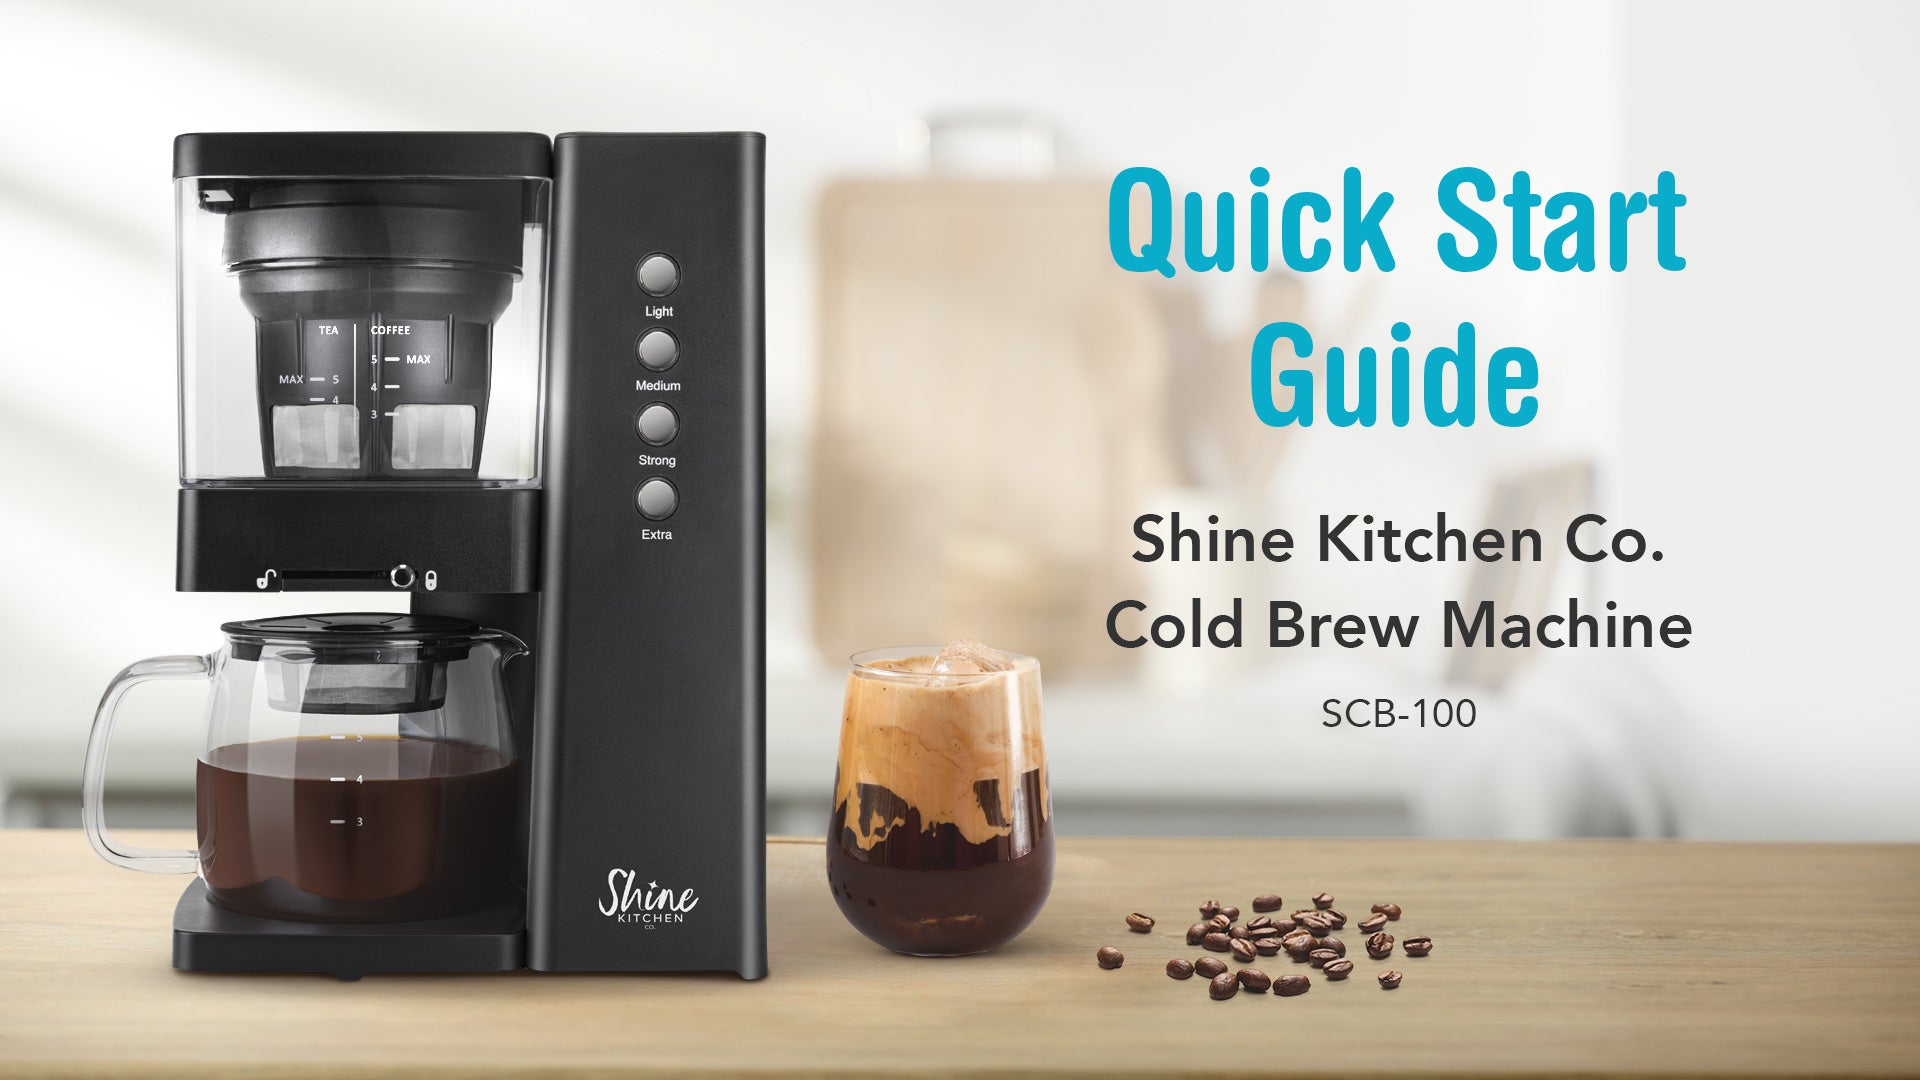 Shine Kitchen Co.® Rapid Cold Brew Coffee & Tea Machine with Vacuum  Extraction Technology